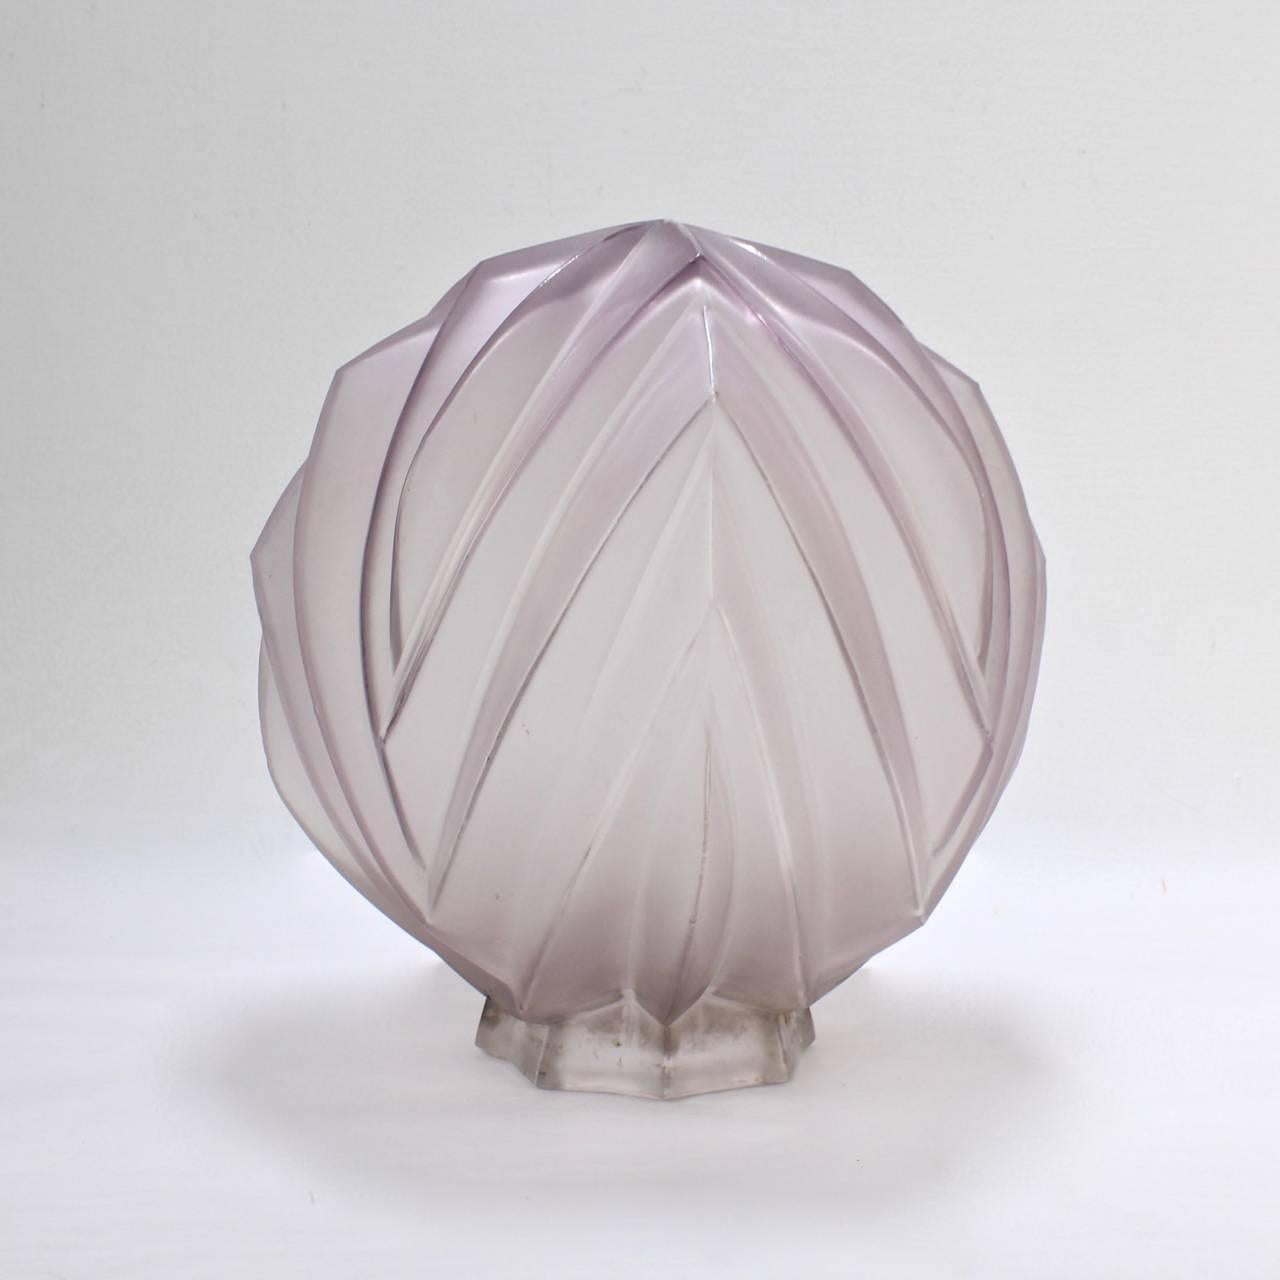 Period French Art Deco Sabino Paris Glass Geometric Ceiling Globe Lamp Shade In Good Condition For Sale In Philadelphia, PA